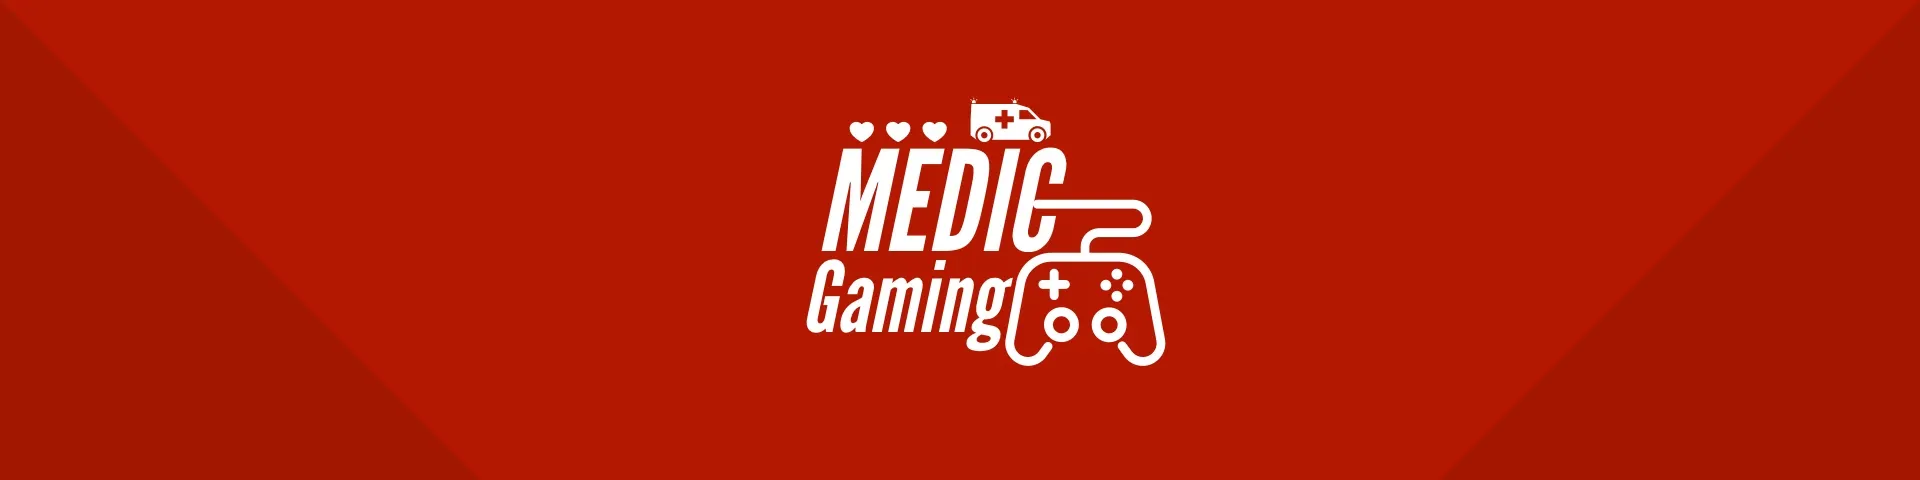 Red Medic Twitch Banner